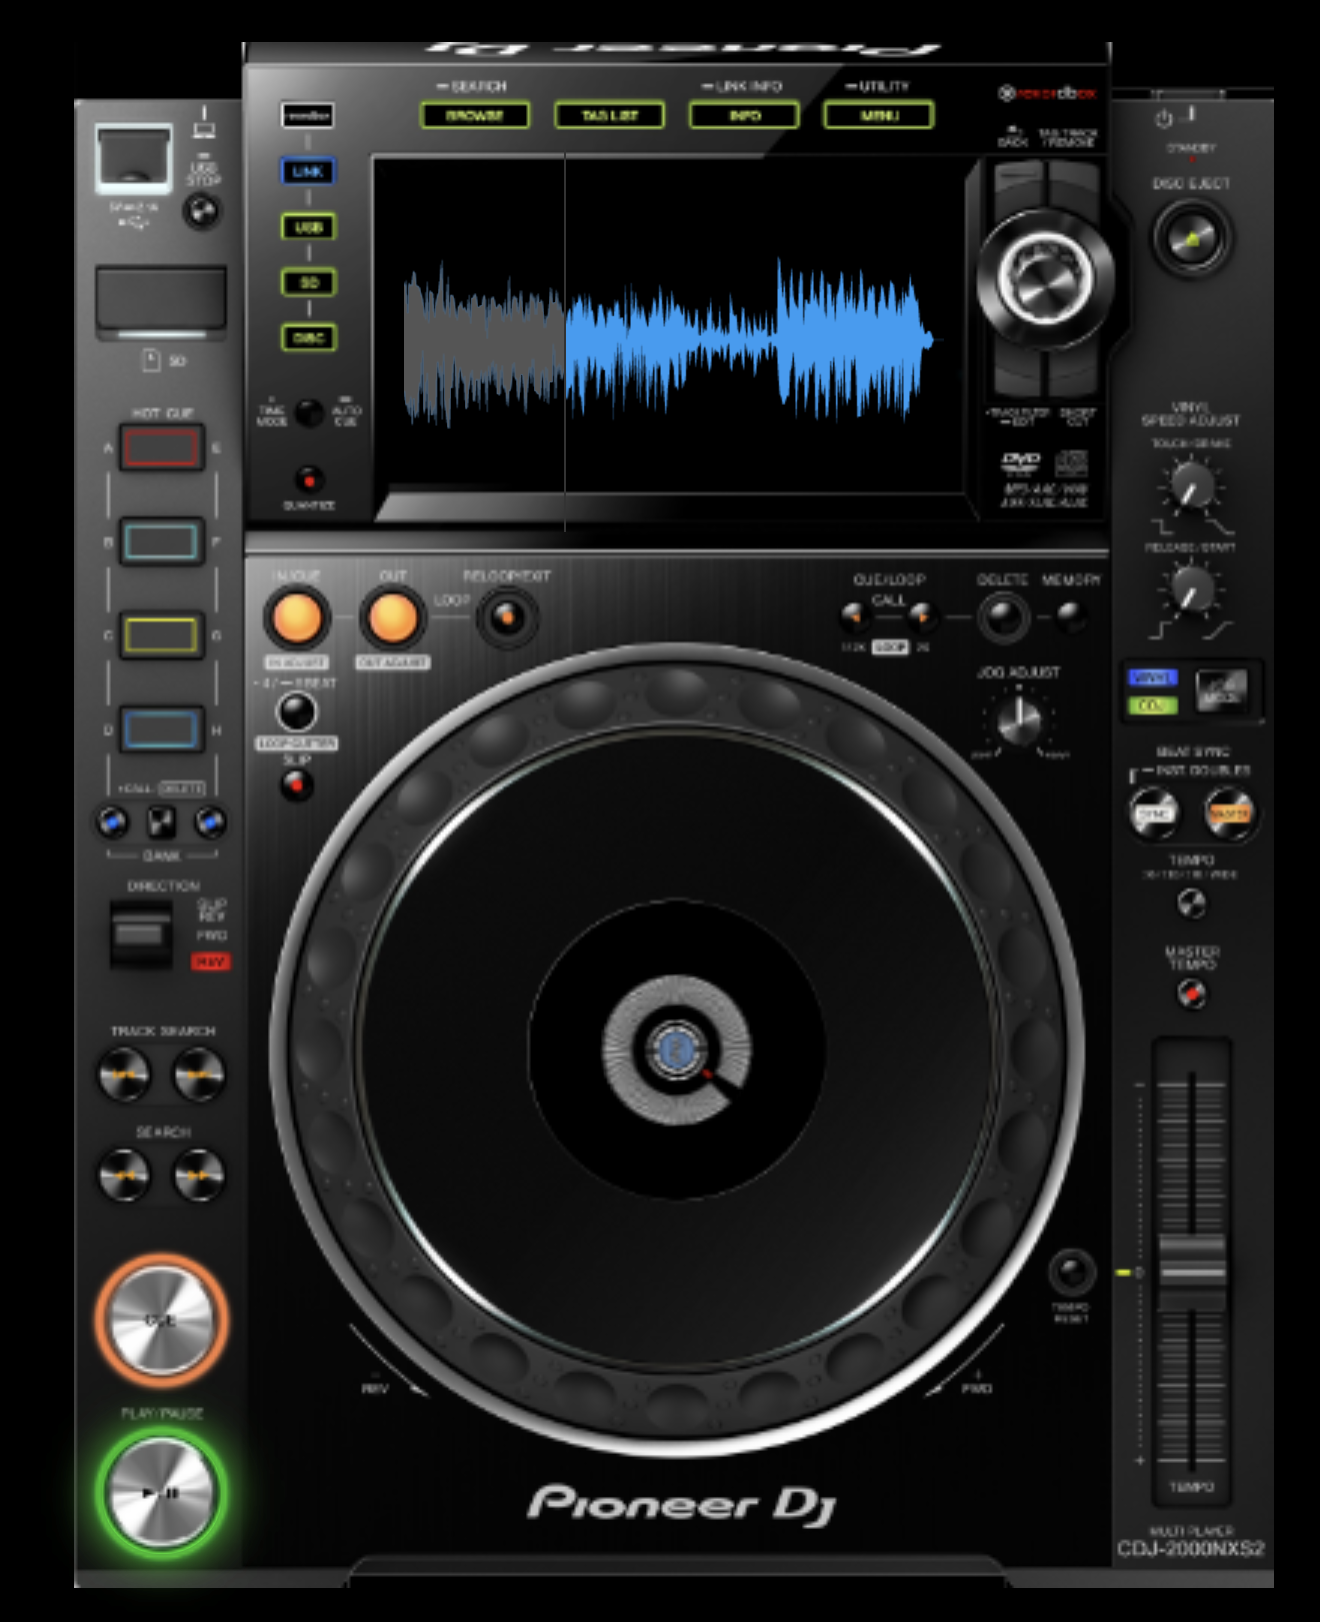 Shiny app with the Pioneer CDJ 2000 NXS2 professional gear look.